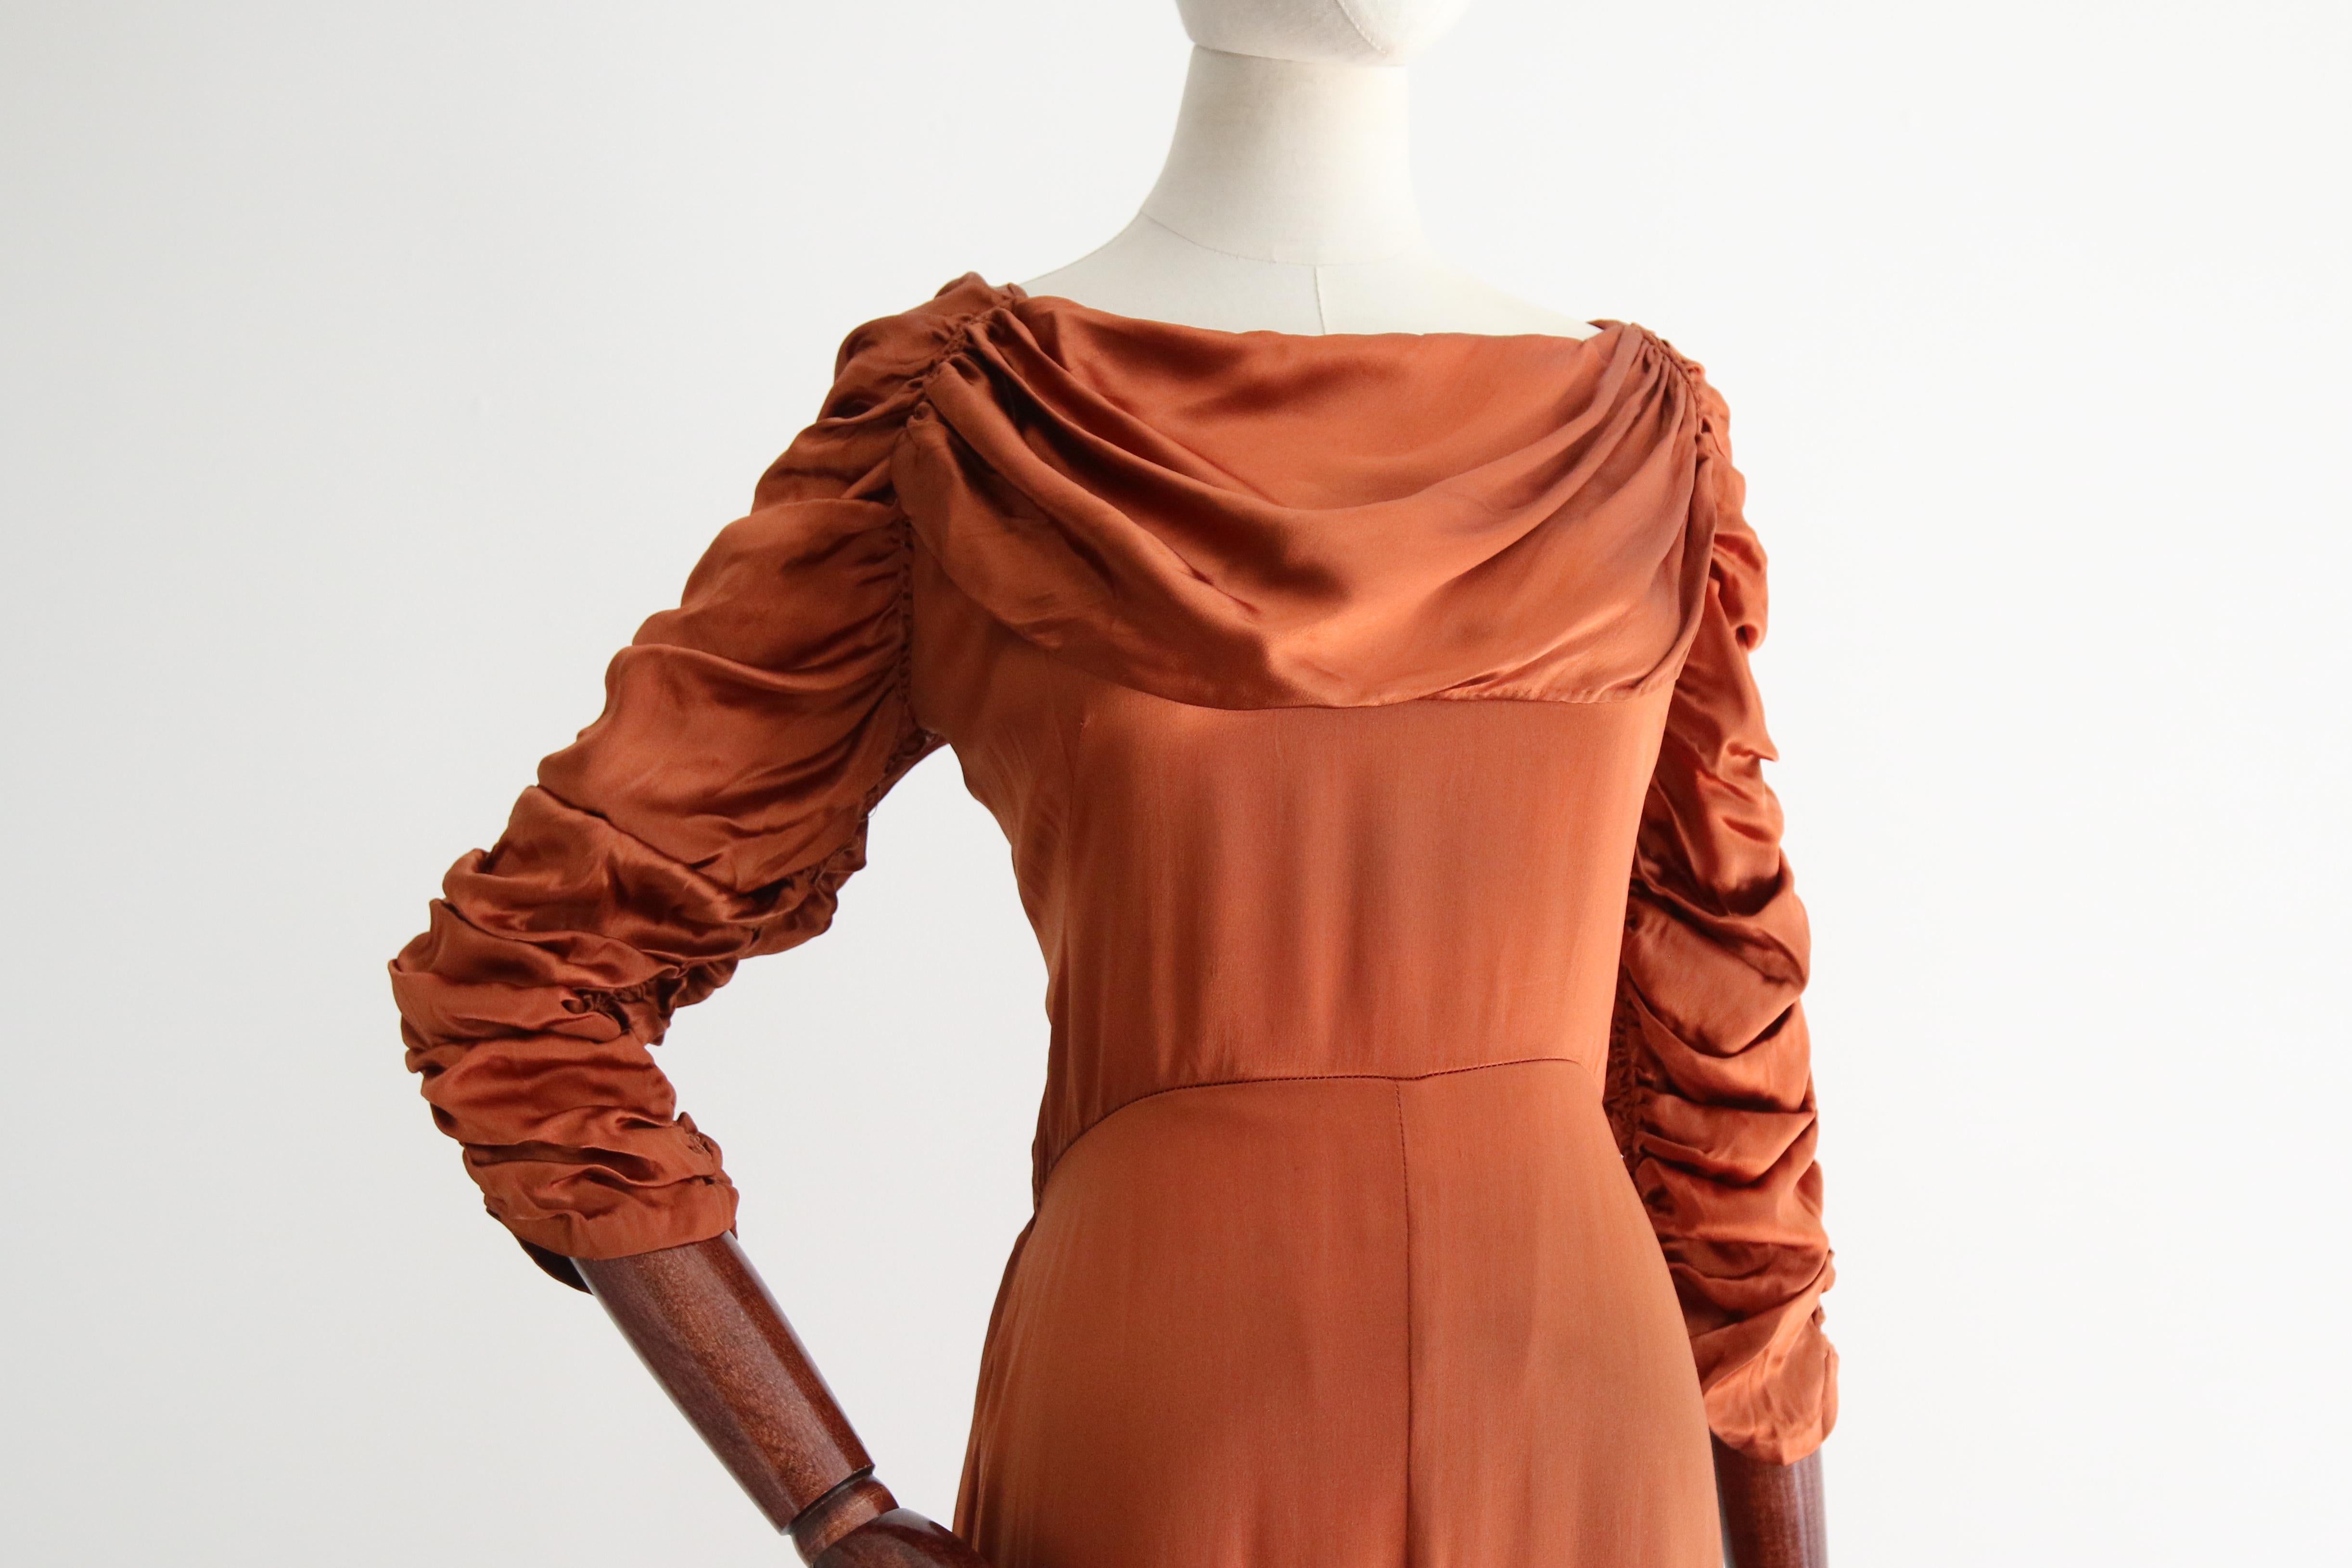 Vintage 1930's Pleated & Ruched Amber Satin Dress UK 10 US 6 For Sale 1